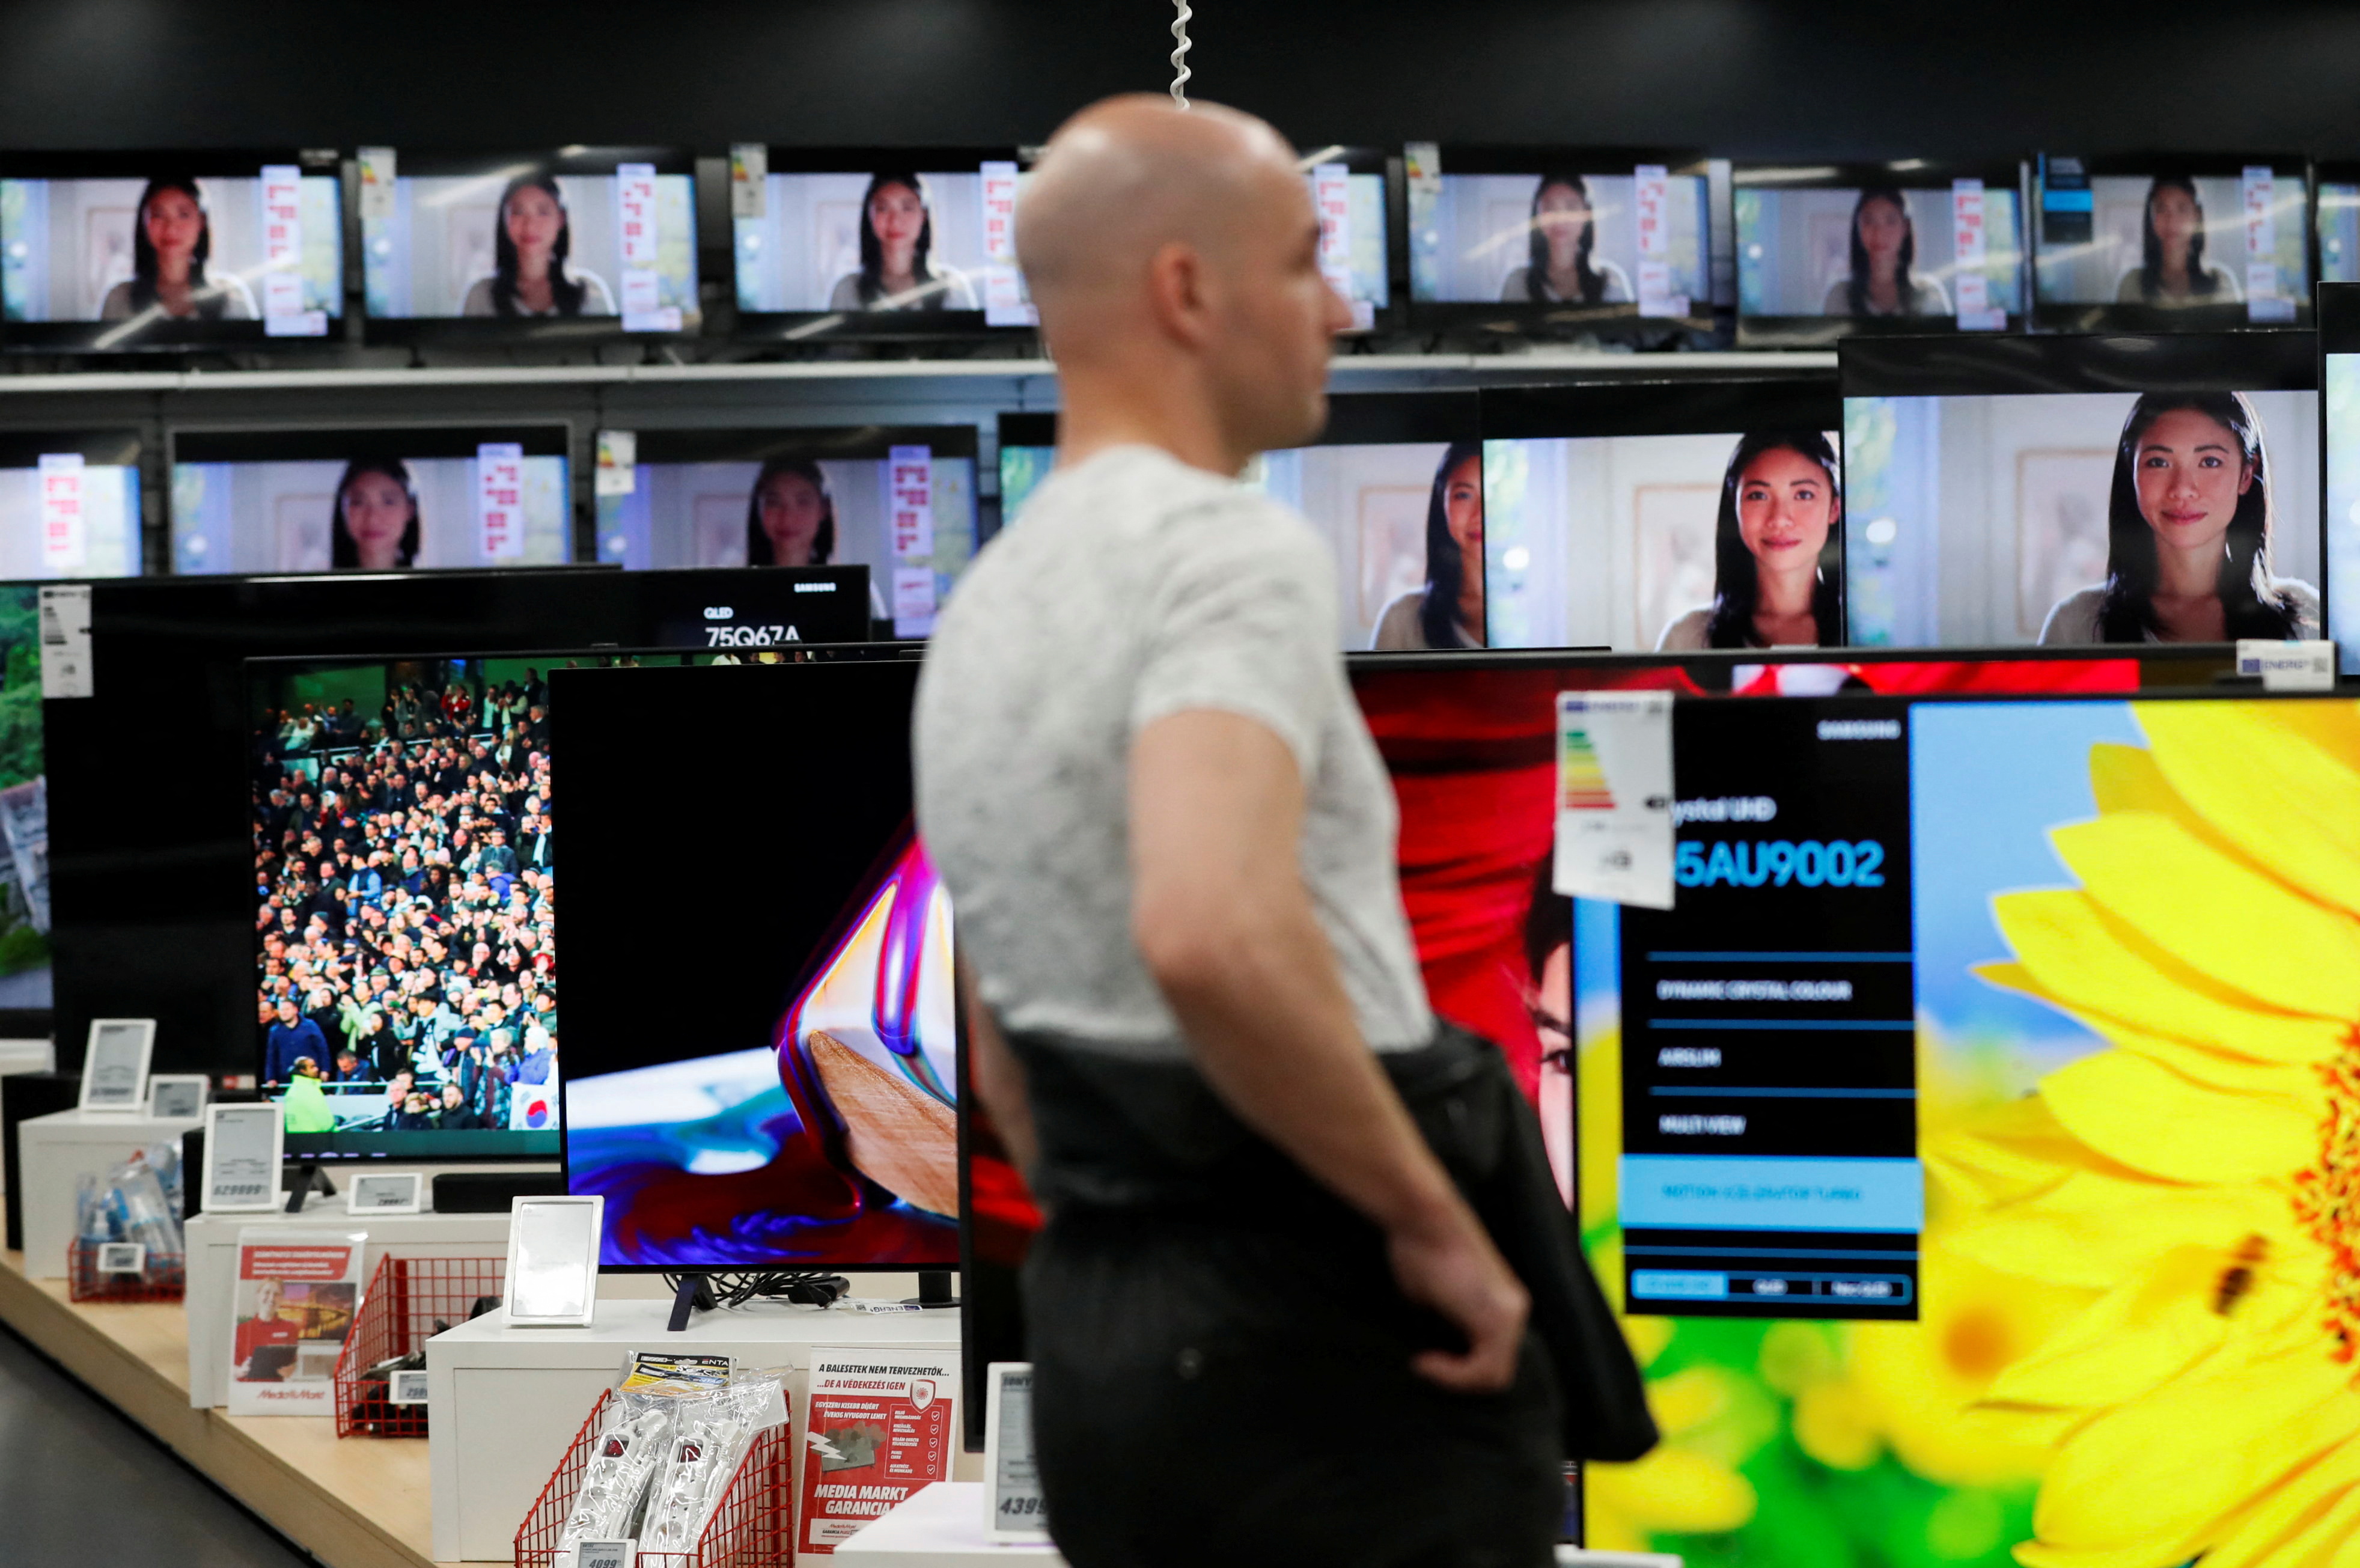 A man walks past television screens at consumer electronics retailer Media Markt in Budapest